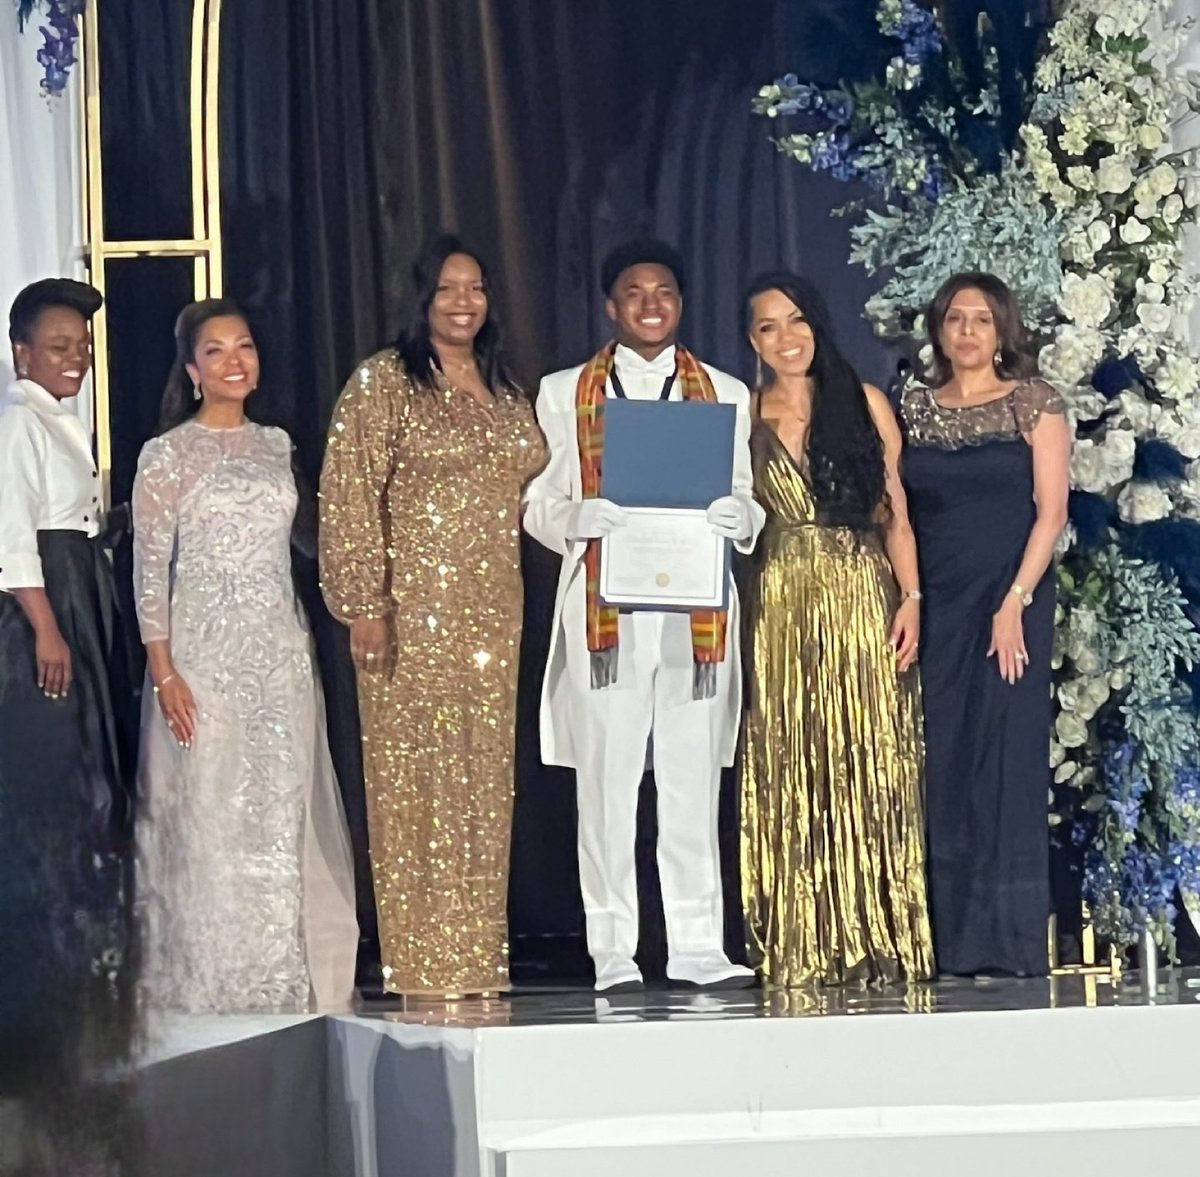 Congratulations to our current NED Teen President Chase Bell. He won 1 of the 3 Merit Awards at the 47th Annual Beautillion Celebration. Way to go Chase! #DallasBeautillion #NEDTeens #FutureLeaders #PutNEDOnTheMap #NEDJackandJillInc #5StarExcellence #ONESouthCentral